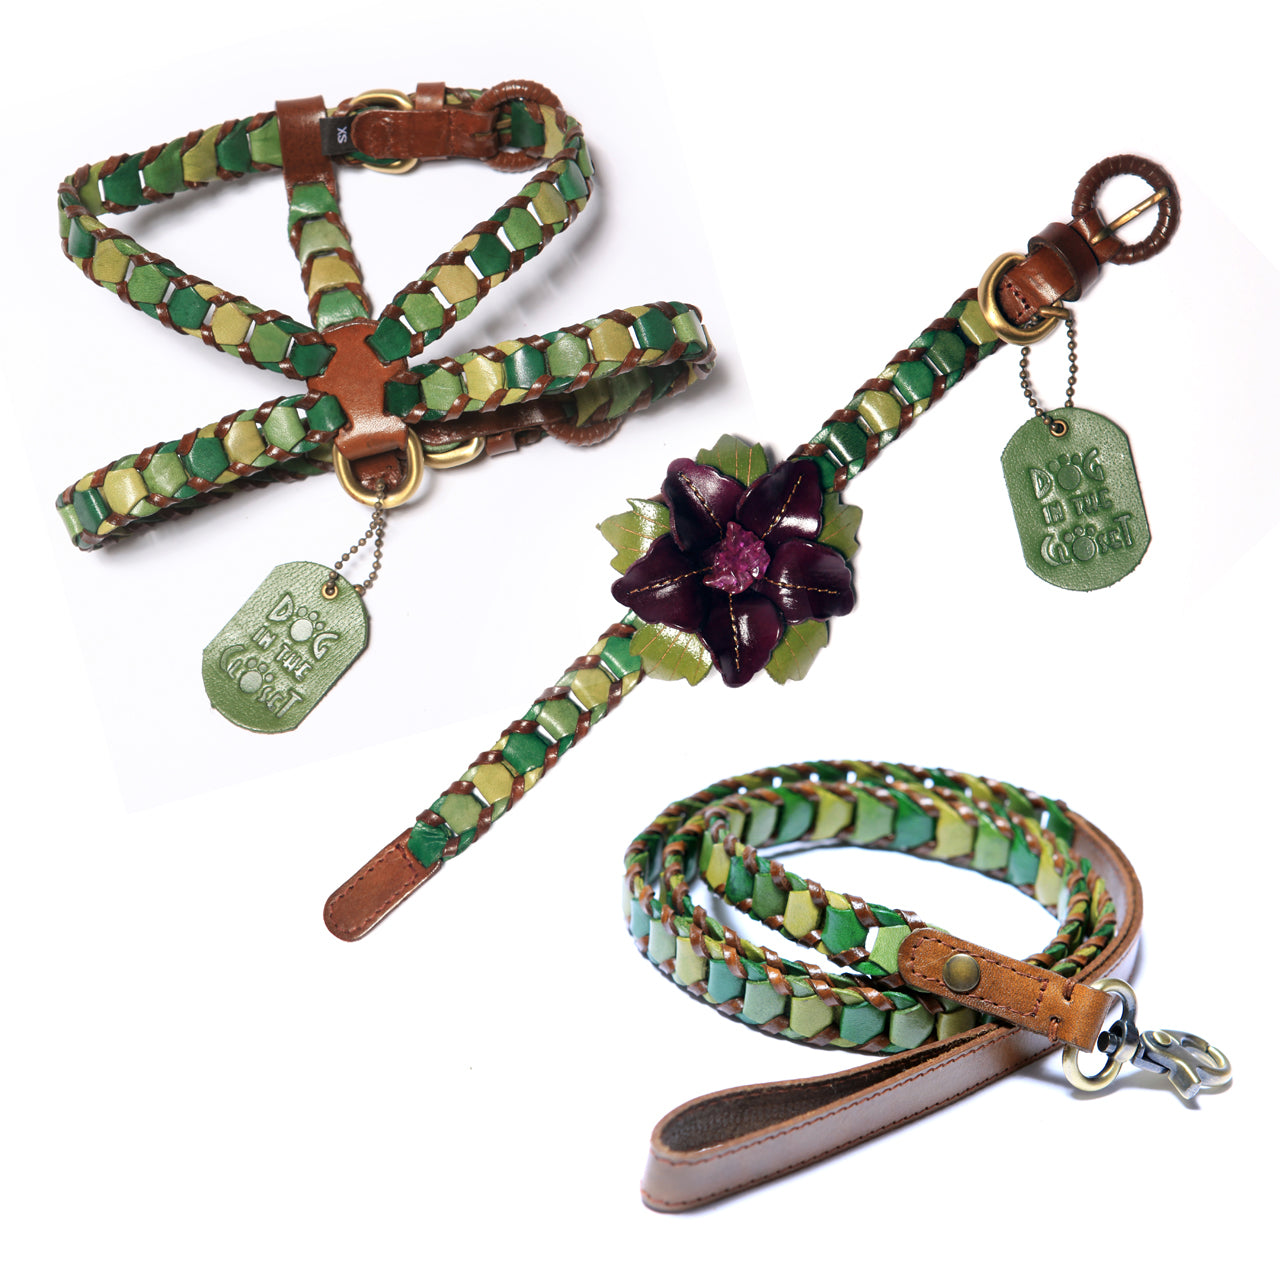 Shades Of Green Leather Dog Harness